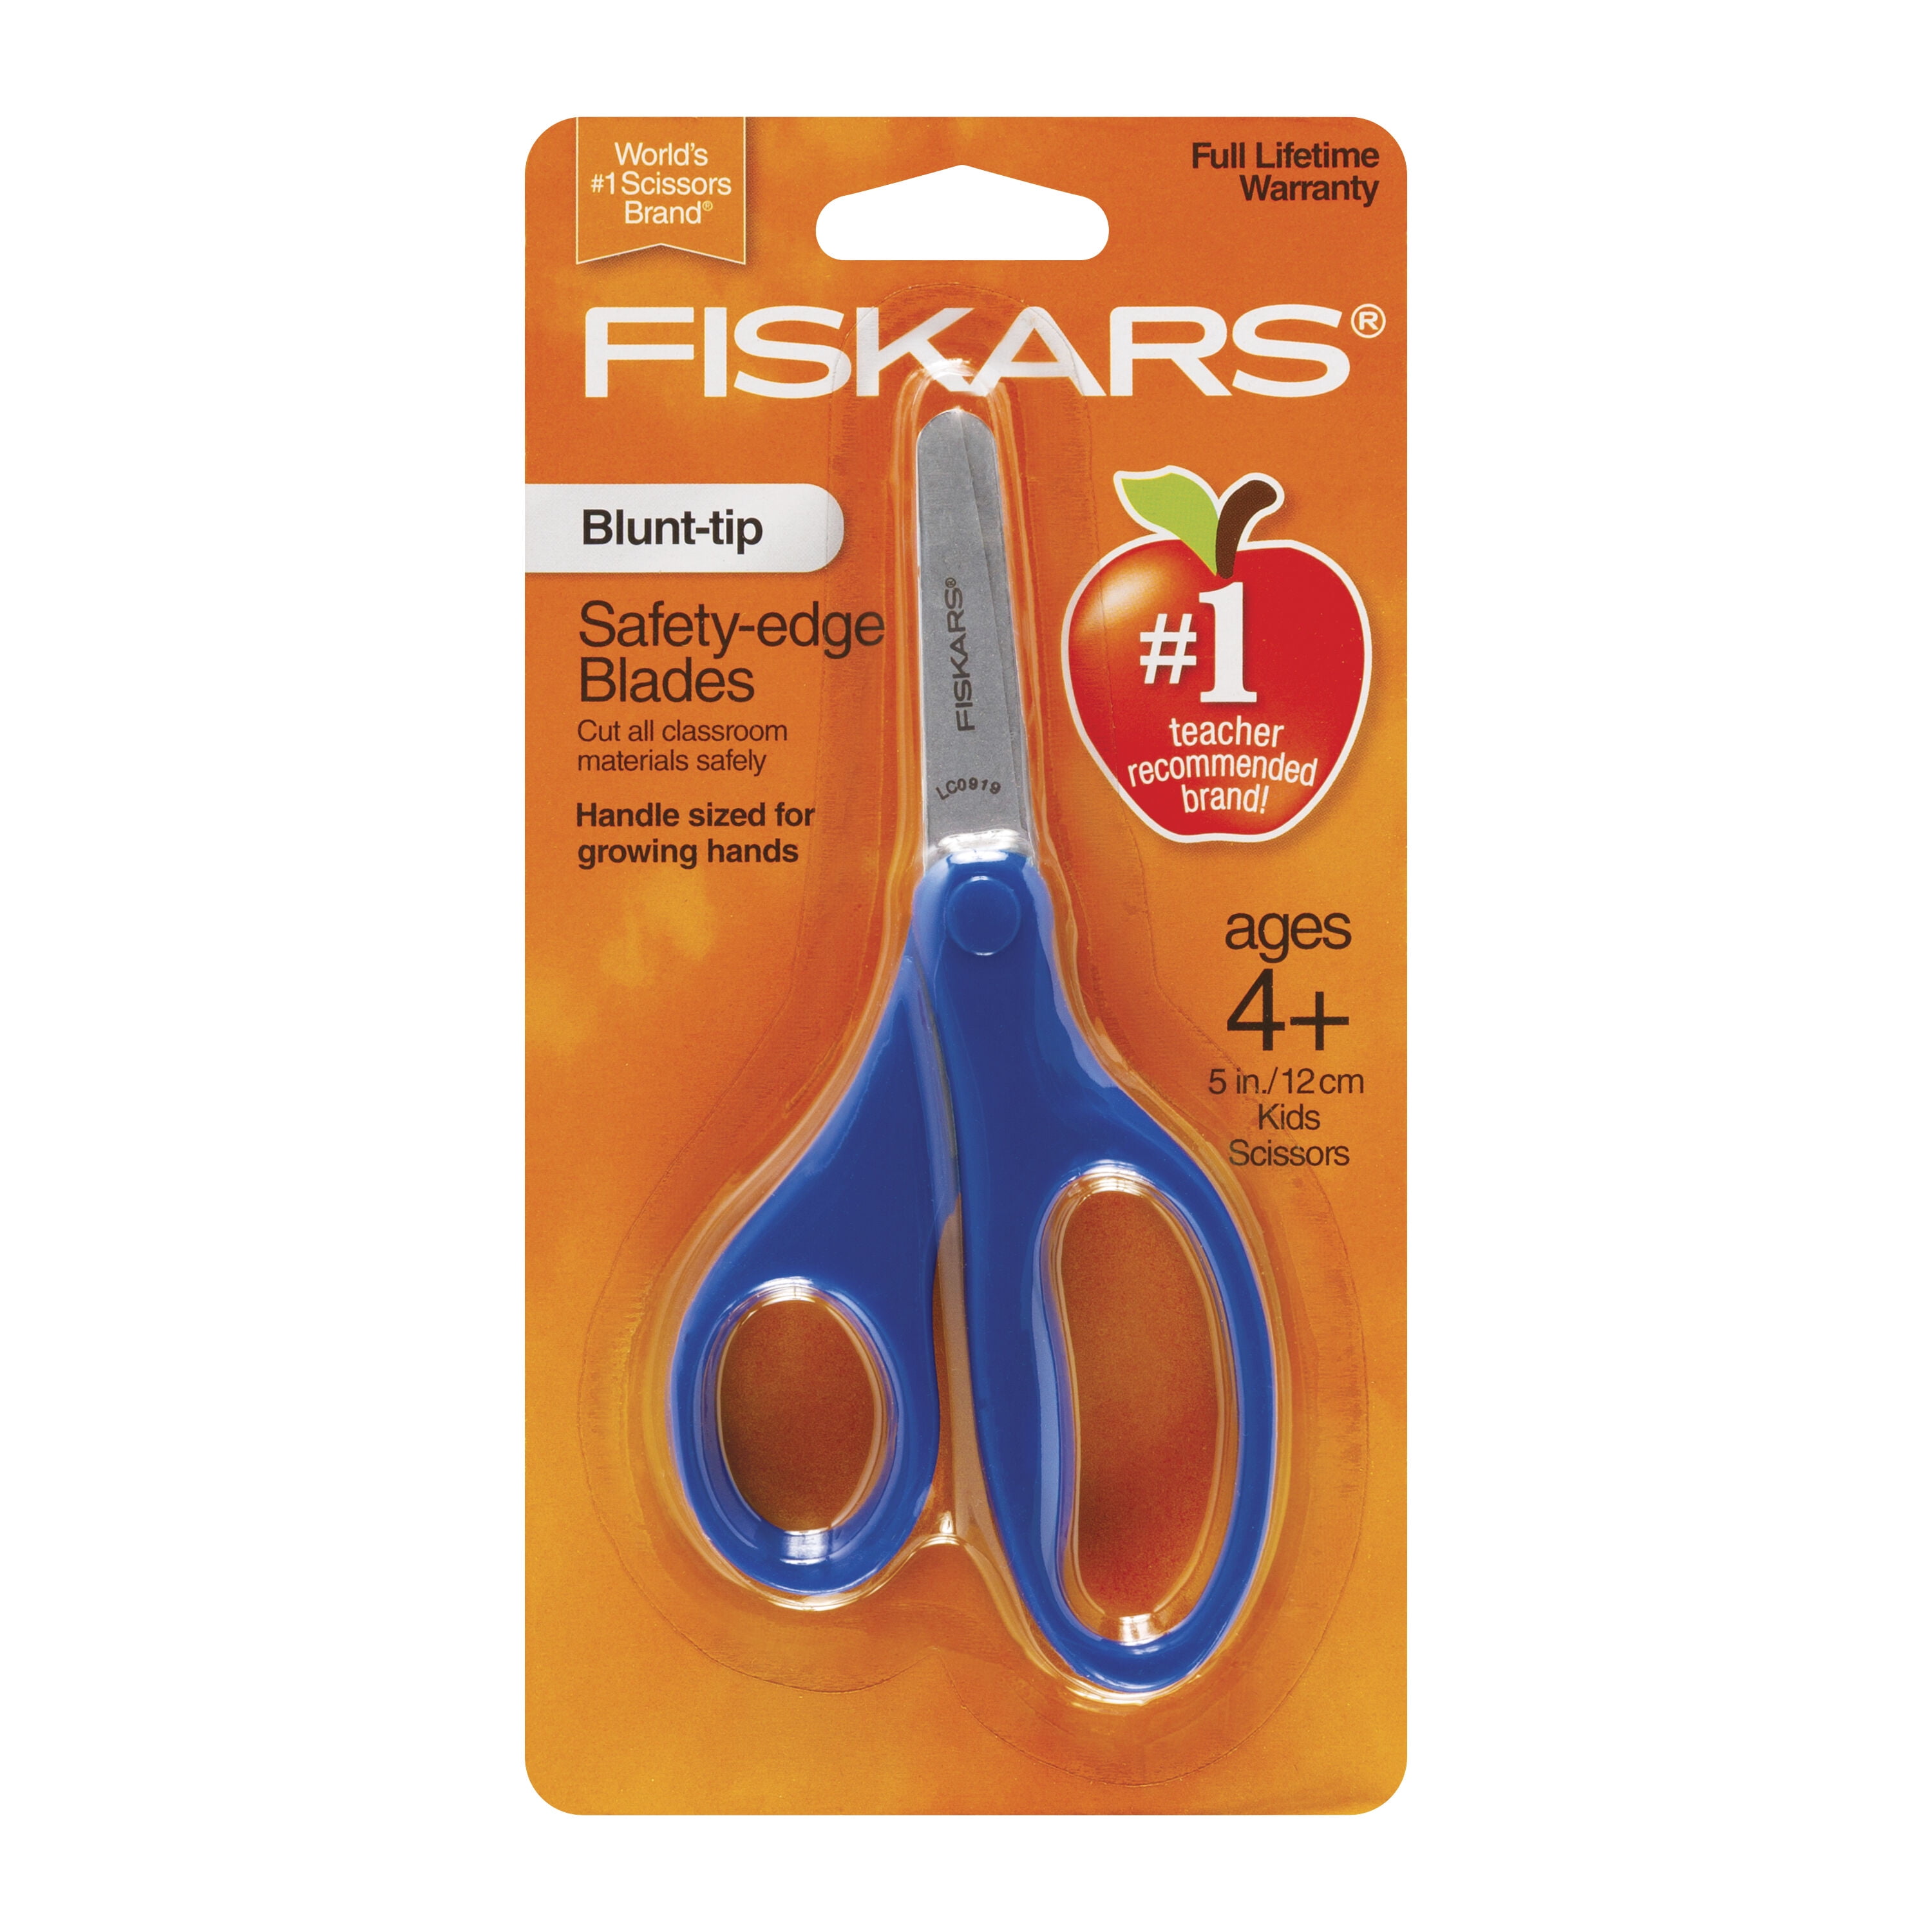 NEW Purple FISKARS scissors for kids 5 inch pointed safety 